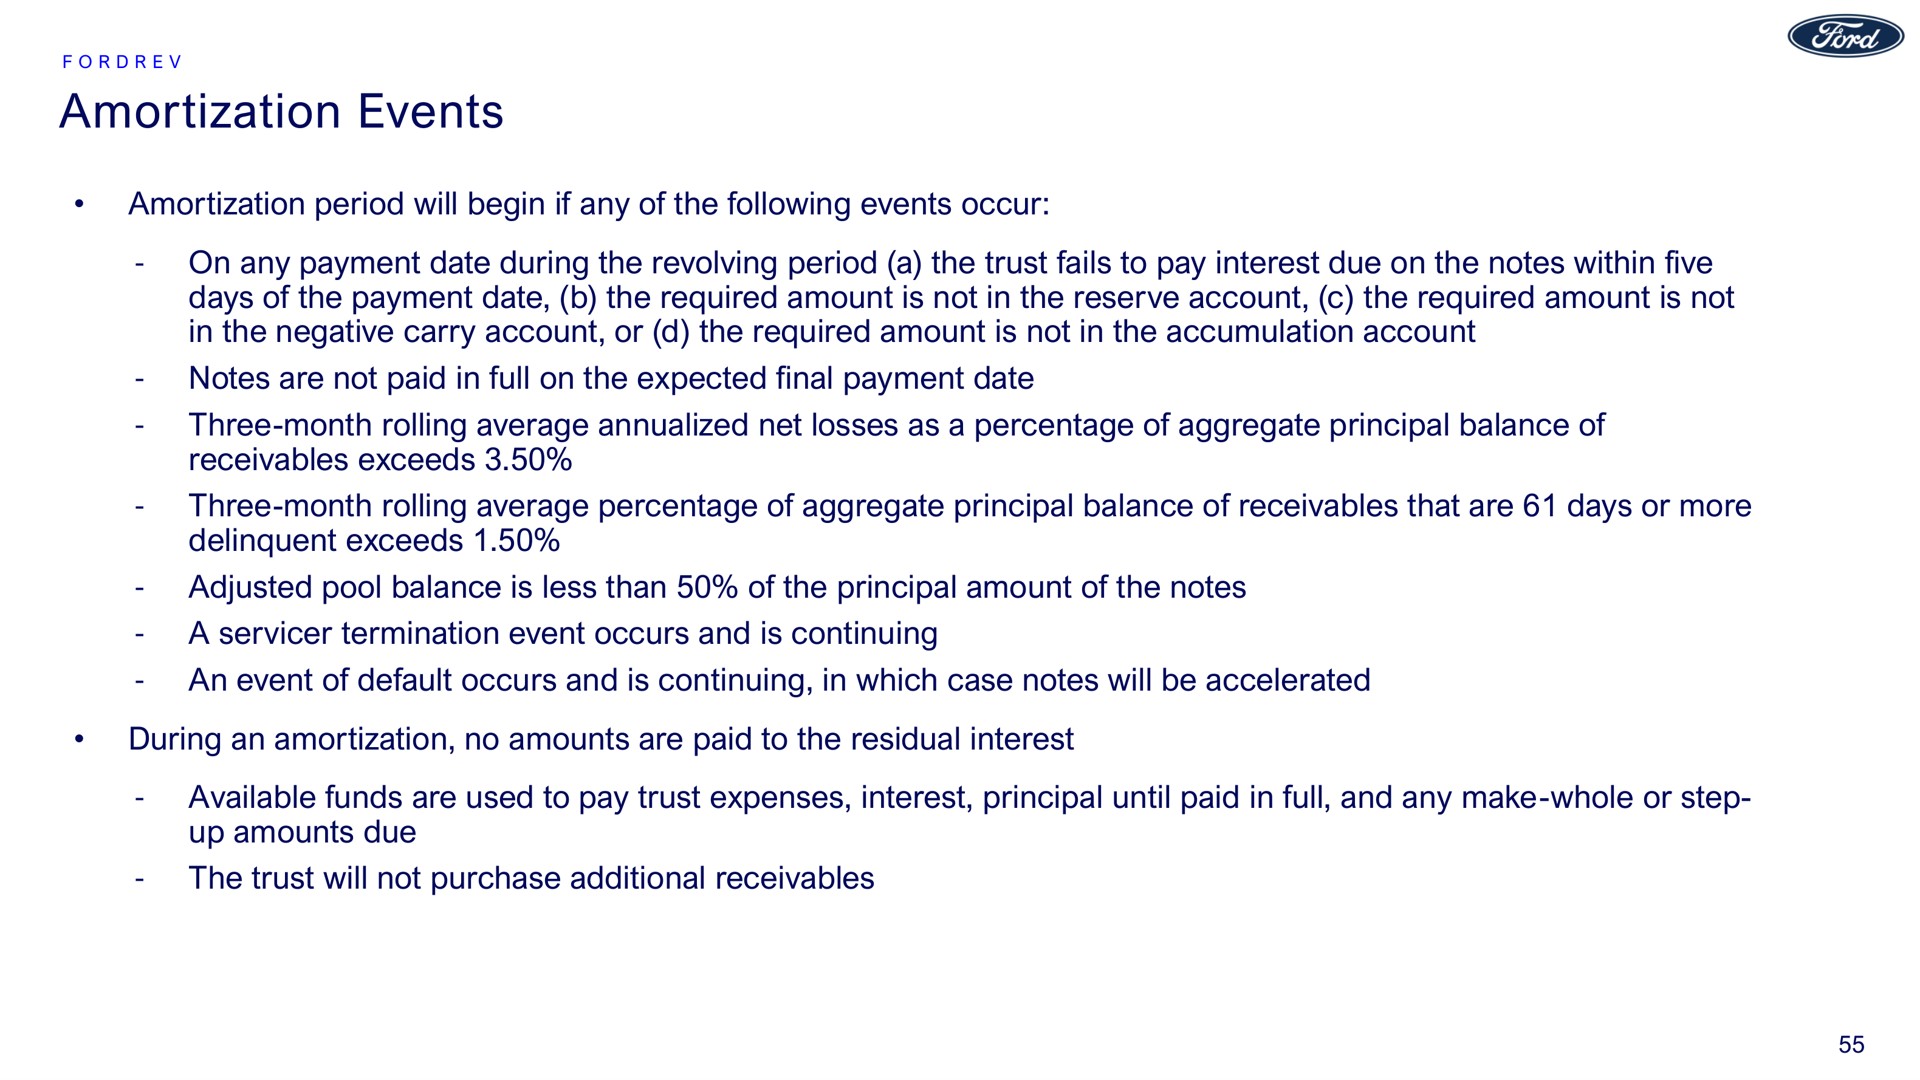 amortization events amortization period will begin if any of the following events occur on any payment date during the revolving period a the trust fails to pay interest due on the notes within five days of the payment date the required amount is not in the reserve account the required amount is not in the negative carry account or the required amount is not in the accumulation account notes are not paid in full on the expected final payment date three month rolling average net losses as a percentage of aggregate principal balance of receivables exceeds three month rolling average percentage of aggregate principal balance of receivables that are days or more delinquent exceeds adjusted pool balance is less than of the principal amount of the notes a termination event occurs and is continuing an event of default occurs and is continuing in which case notes will be accelerated during an amortization no amounts are paid to the residual interest available funds are used to pay trust expenses interest principal until paid in full and any make whole or step up amounts due the trust will not purchase additional receivables | Ford